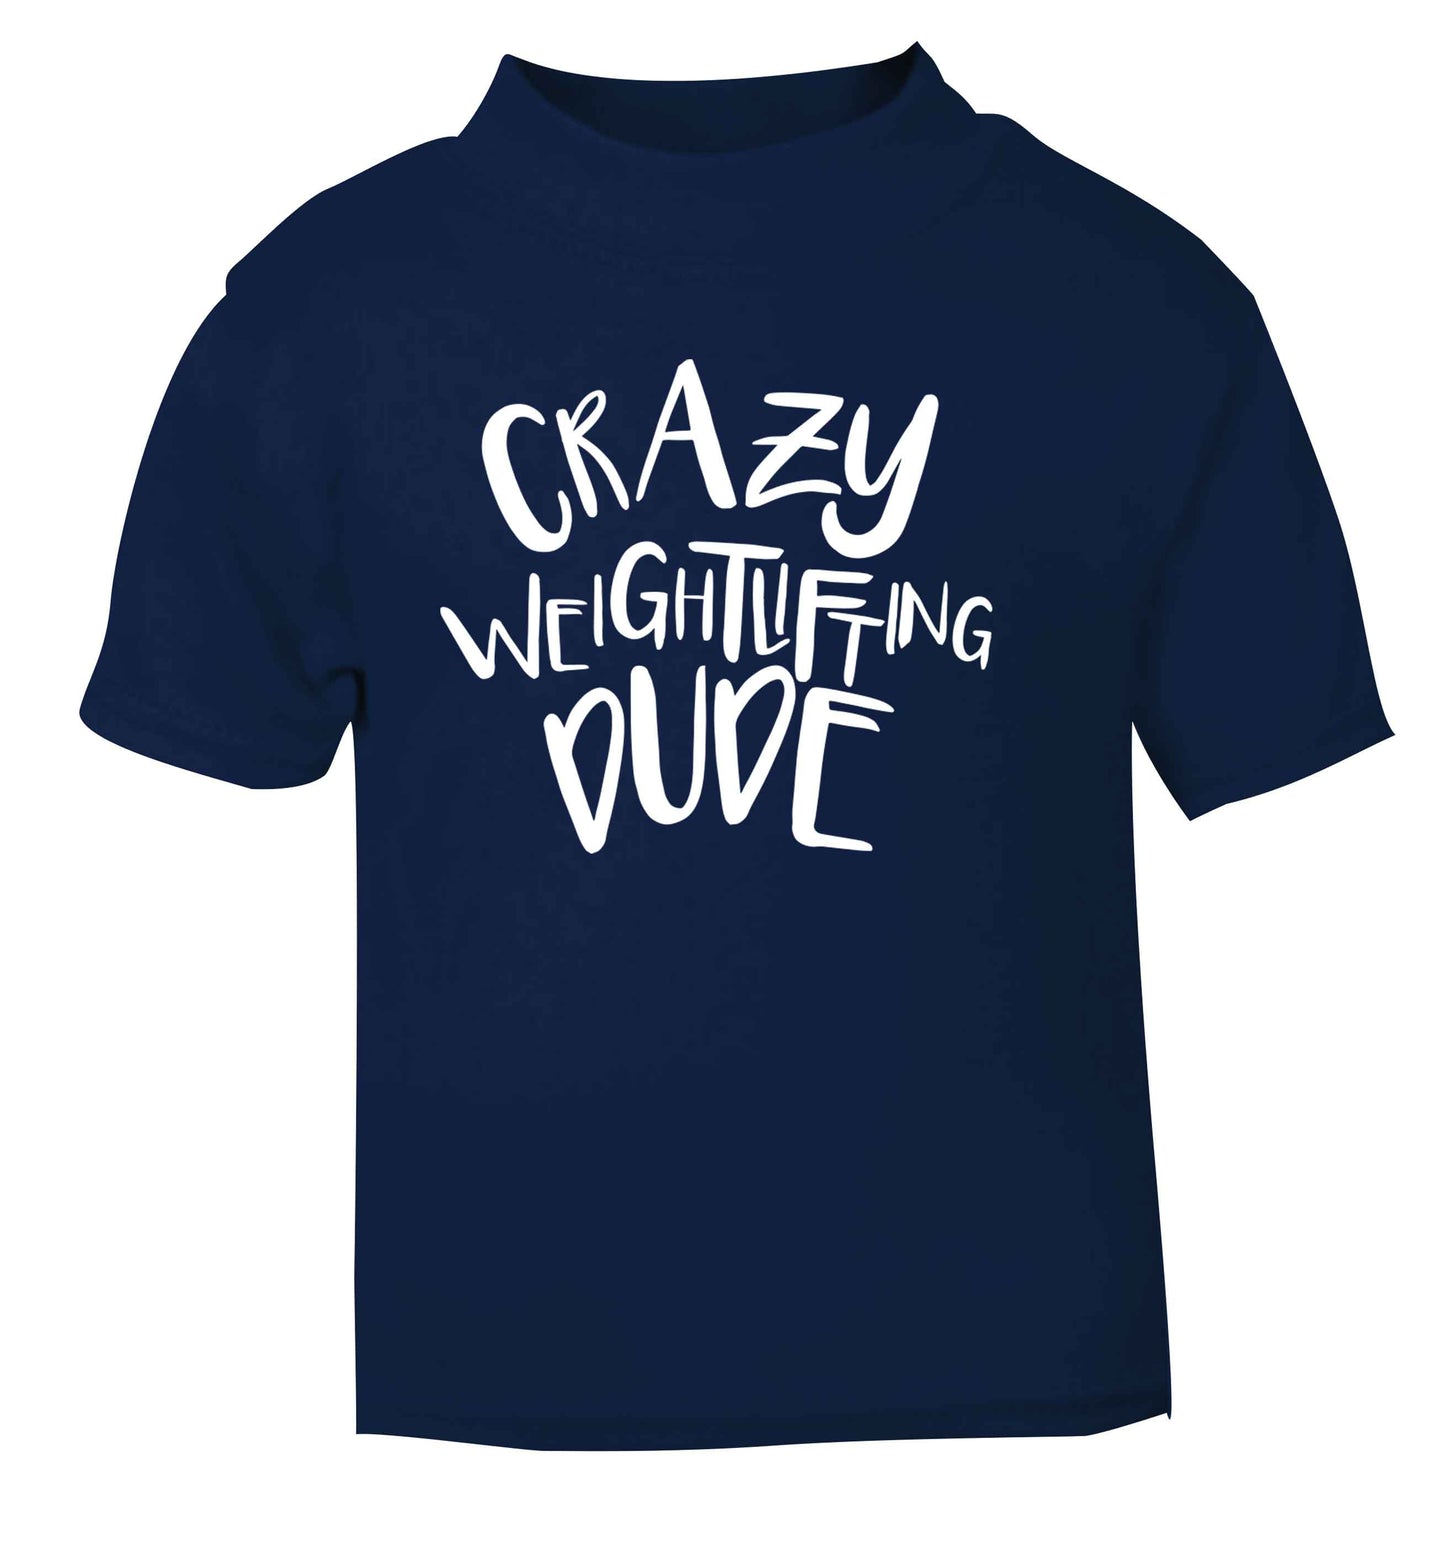 Crazy weightlifting dude navy Baby Toddler Tshirt 2 Years